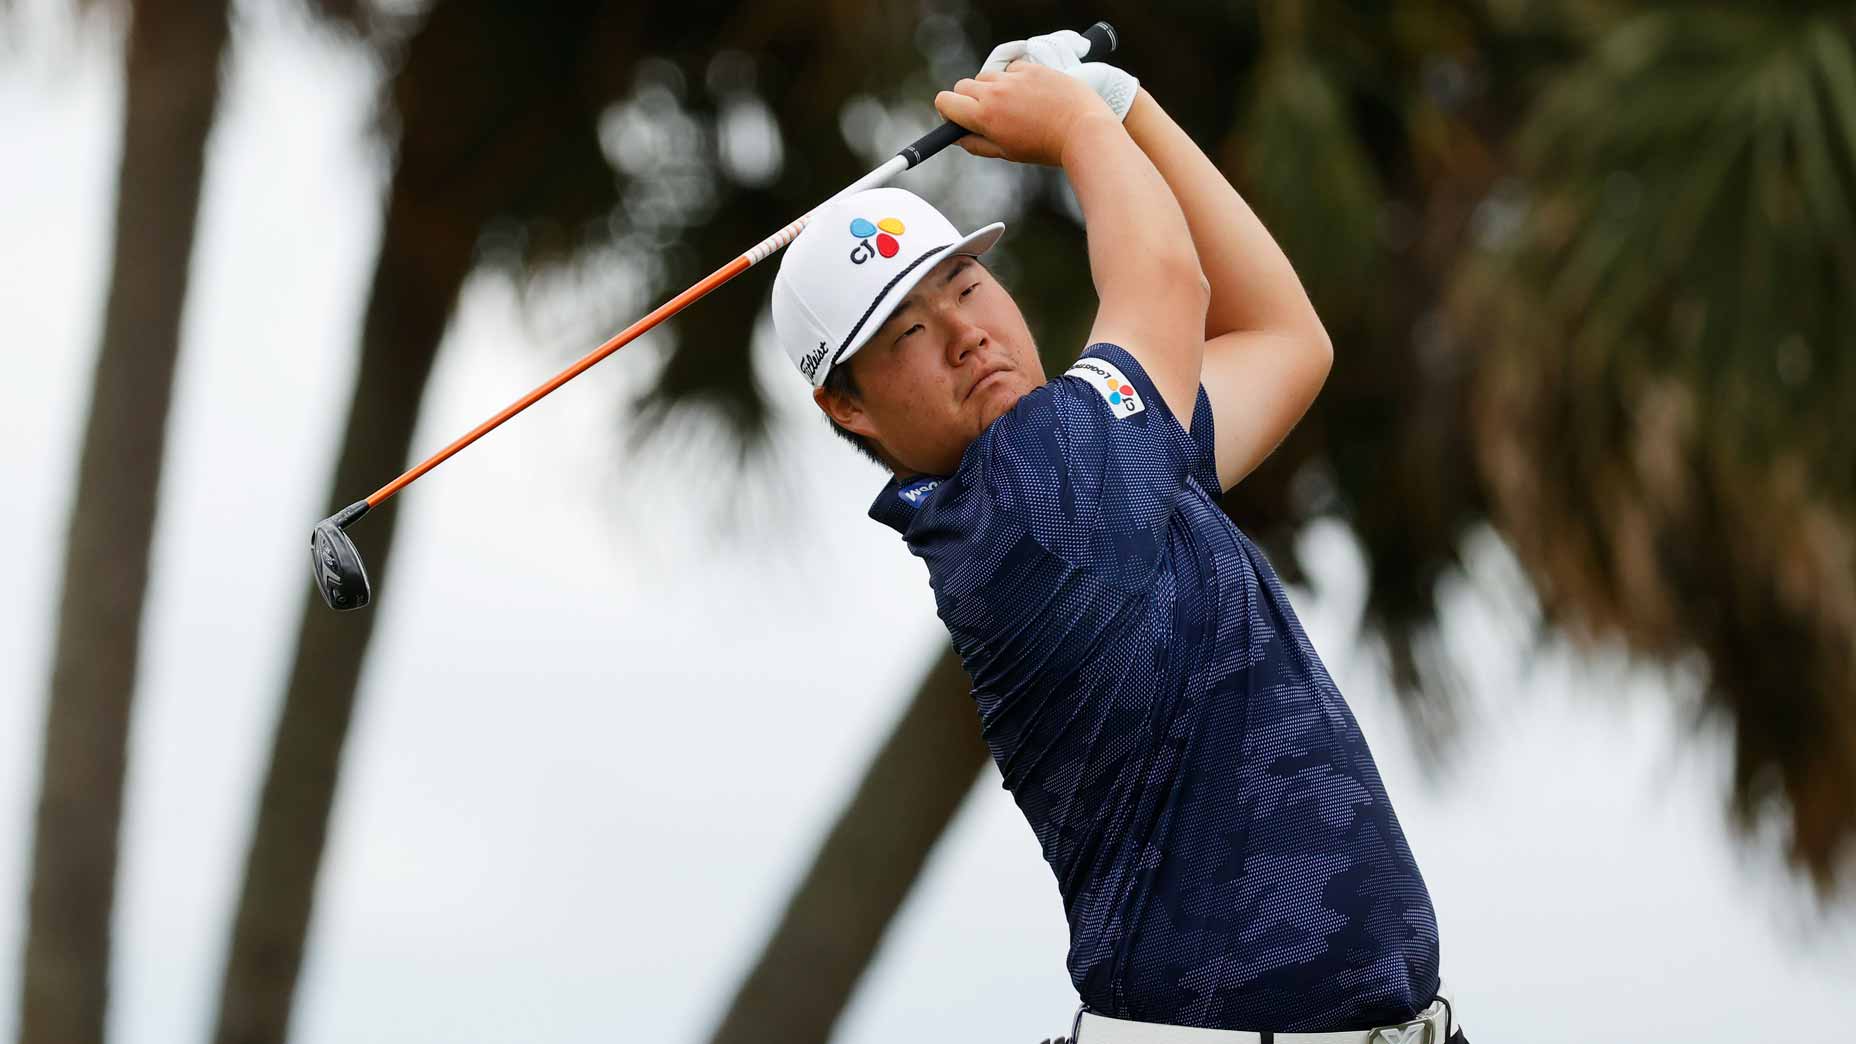 2021 Honda Classic tee times Final round pairings for Sunday